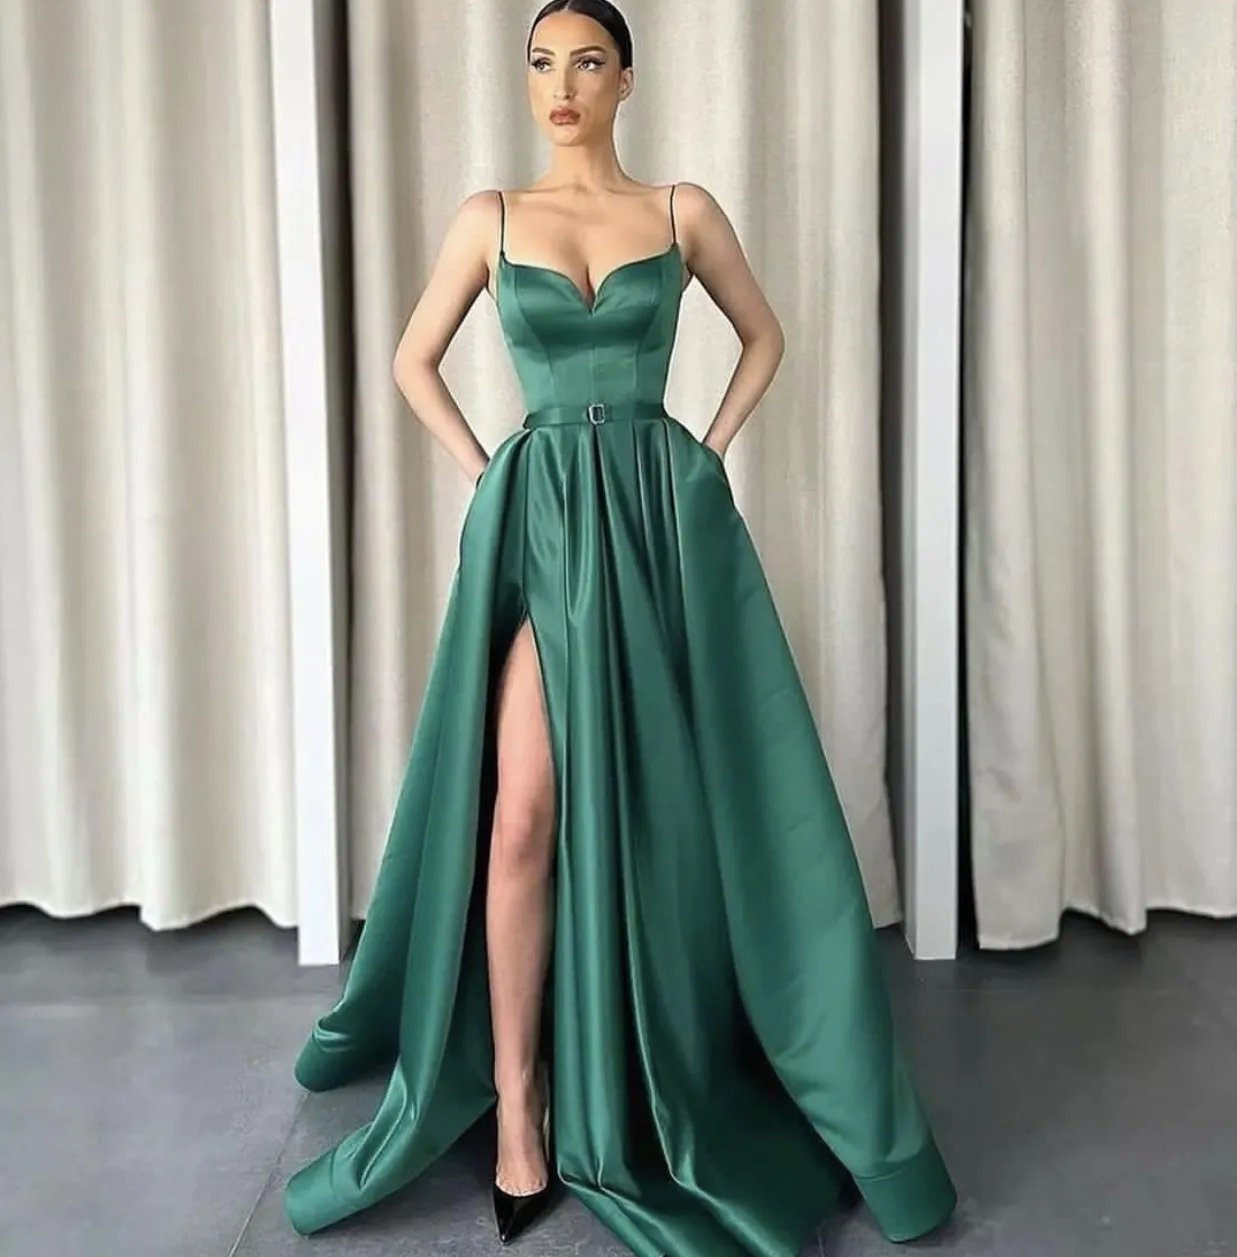 Green Bridesmaid Dresses Wedding Party Guest Gowns A-line Junior Maid of Honor Dress Full Length Side Split